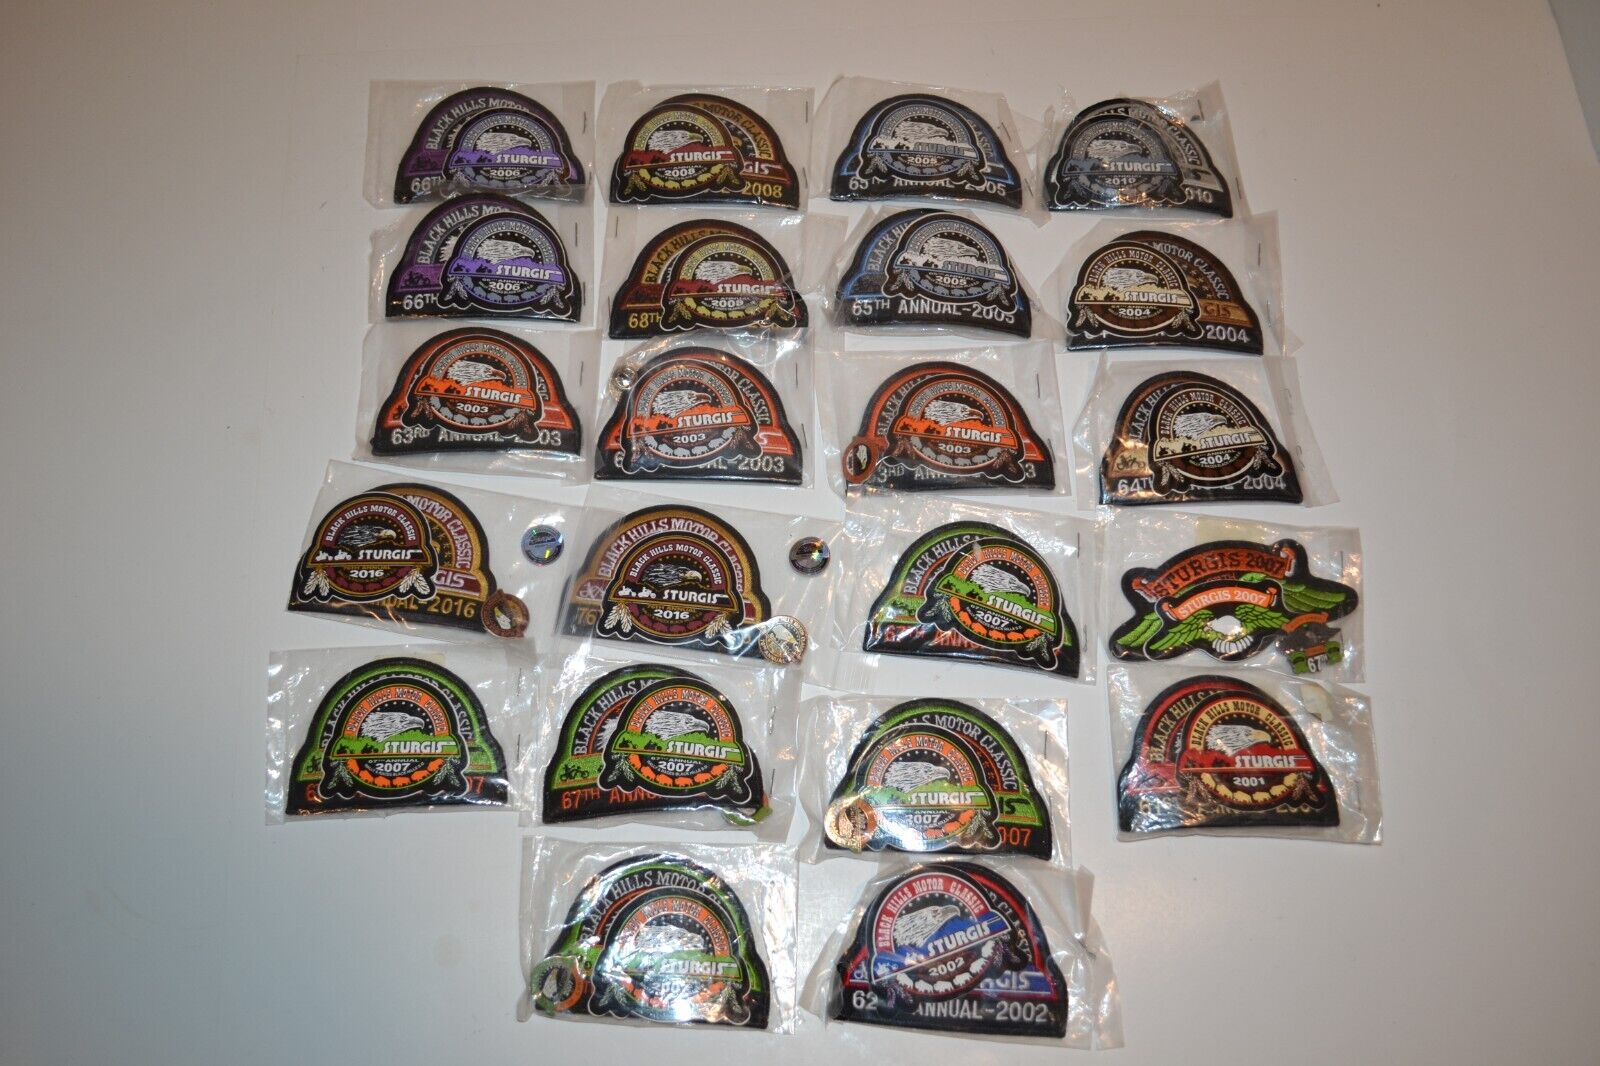 22 Sturgis Pins and Patches Sturgis Rally Brand New